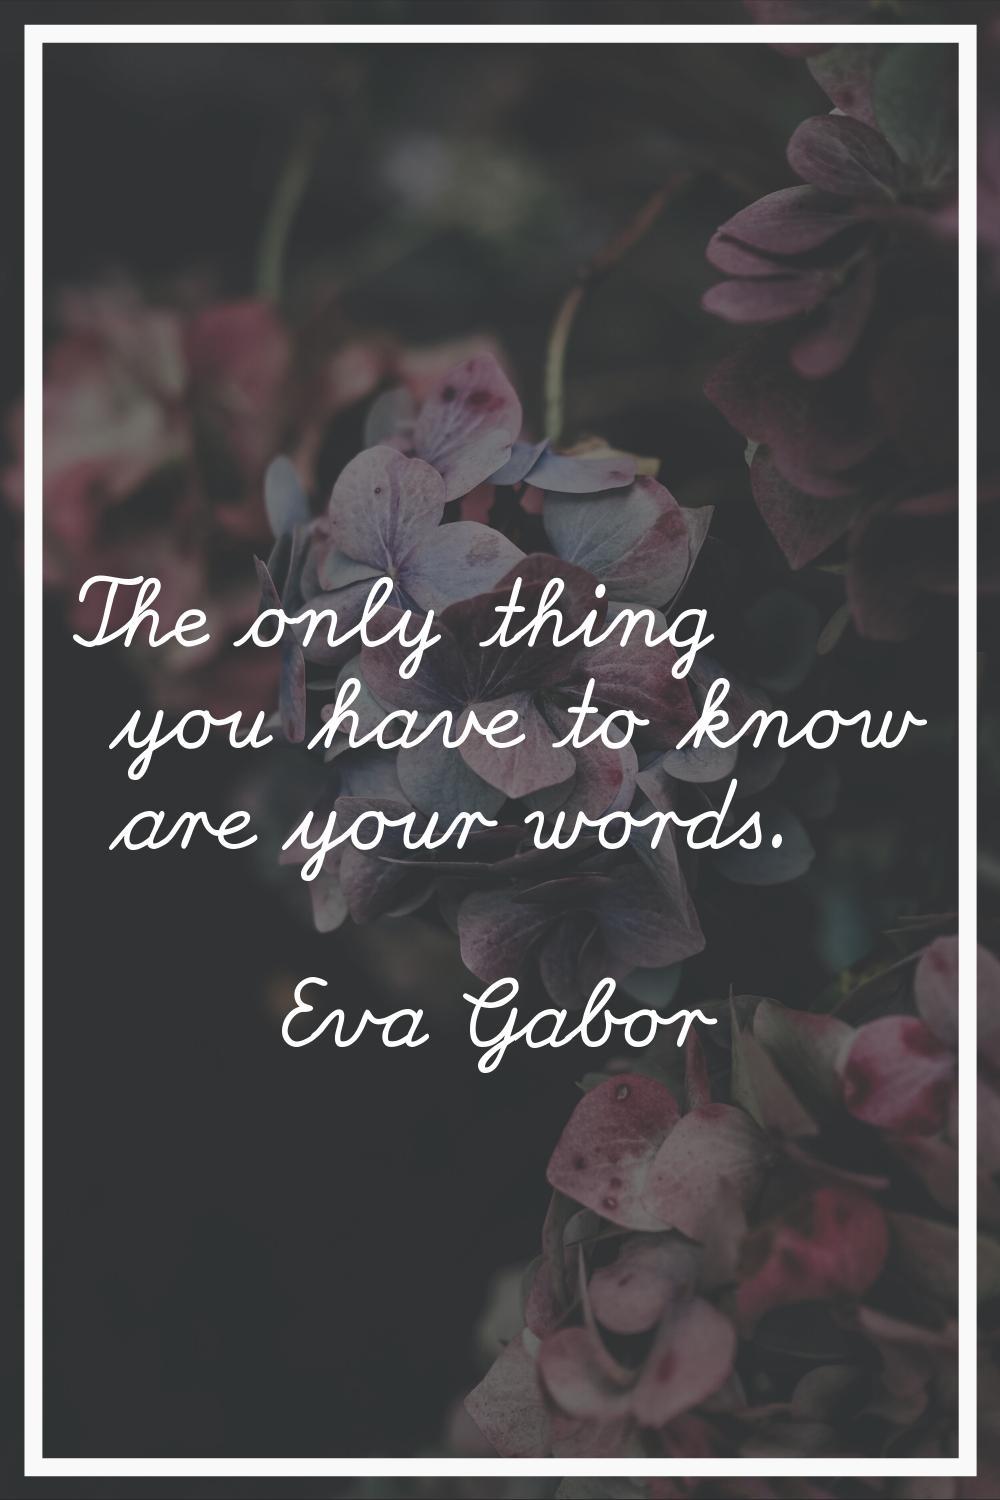 The only thing you have to know are your words.